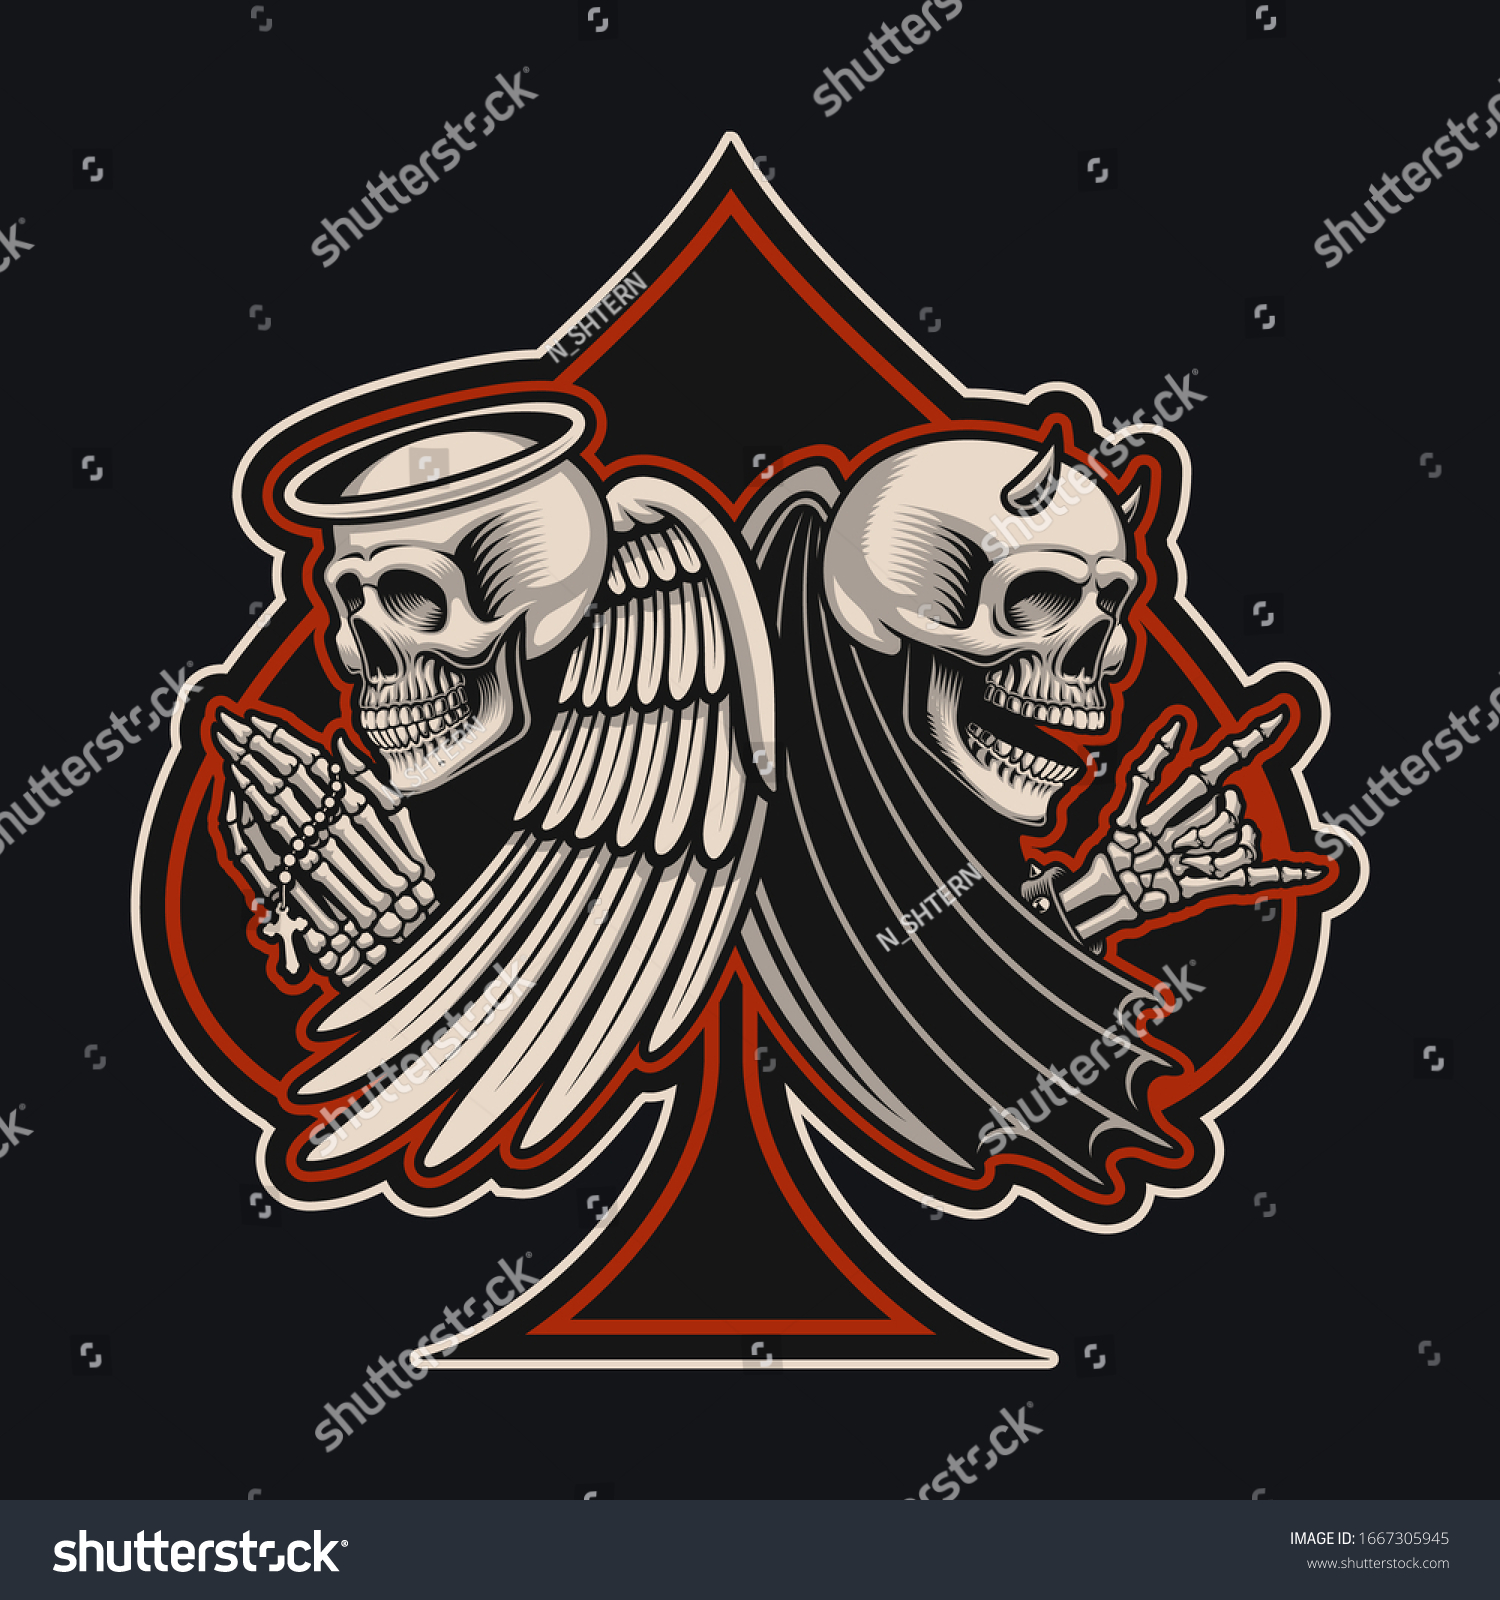 SVG of Vector illustration with an angel and devil skeletons in tattoo style. This design is perfect for apparel design and many other uses. svg